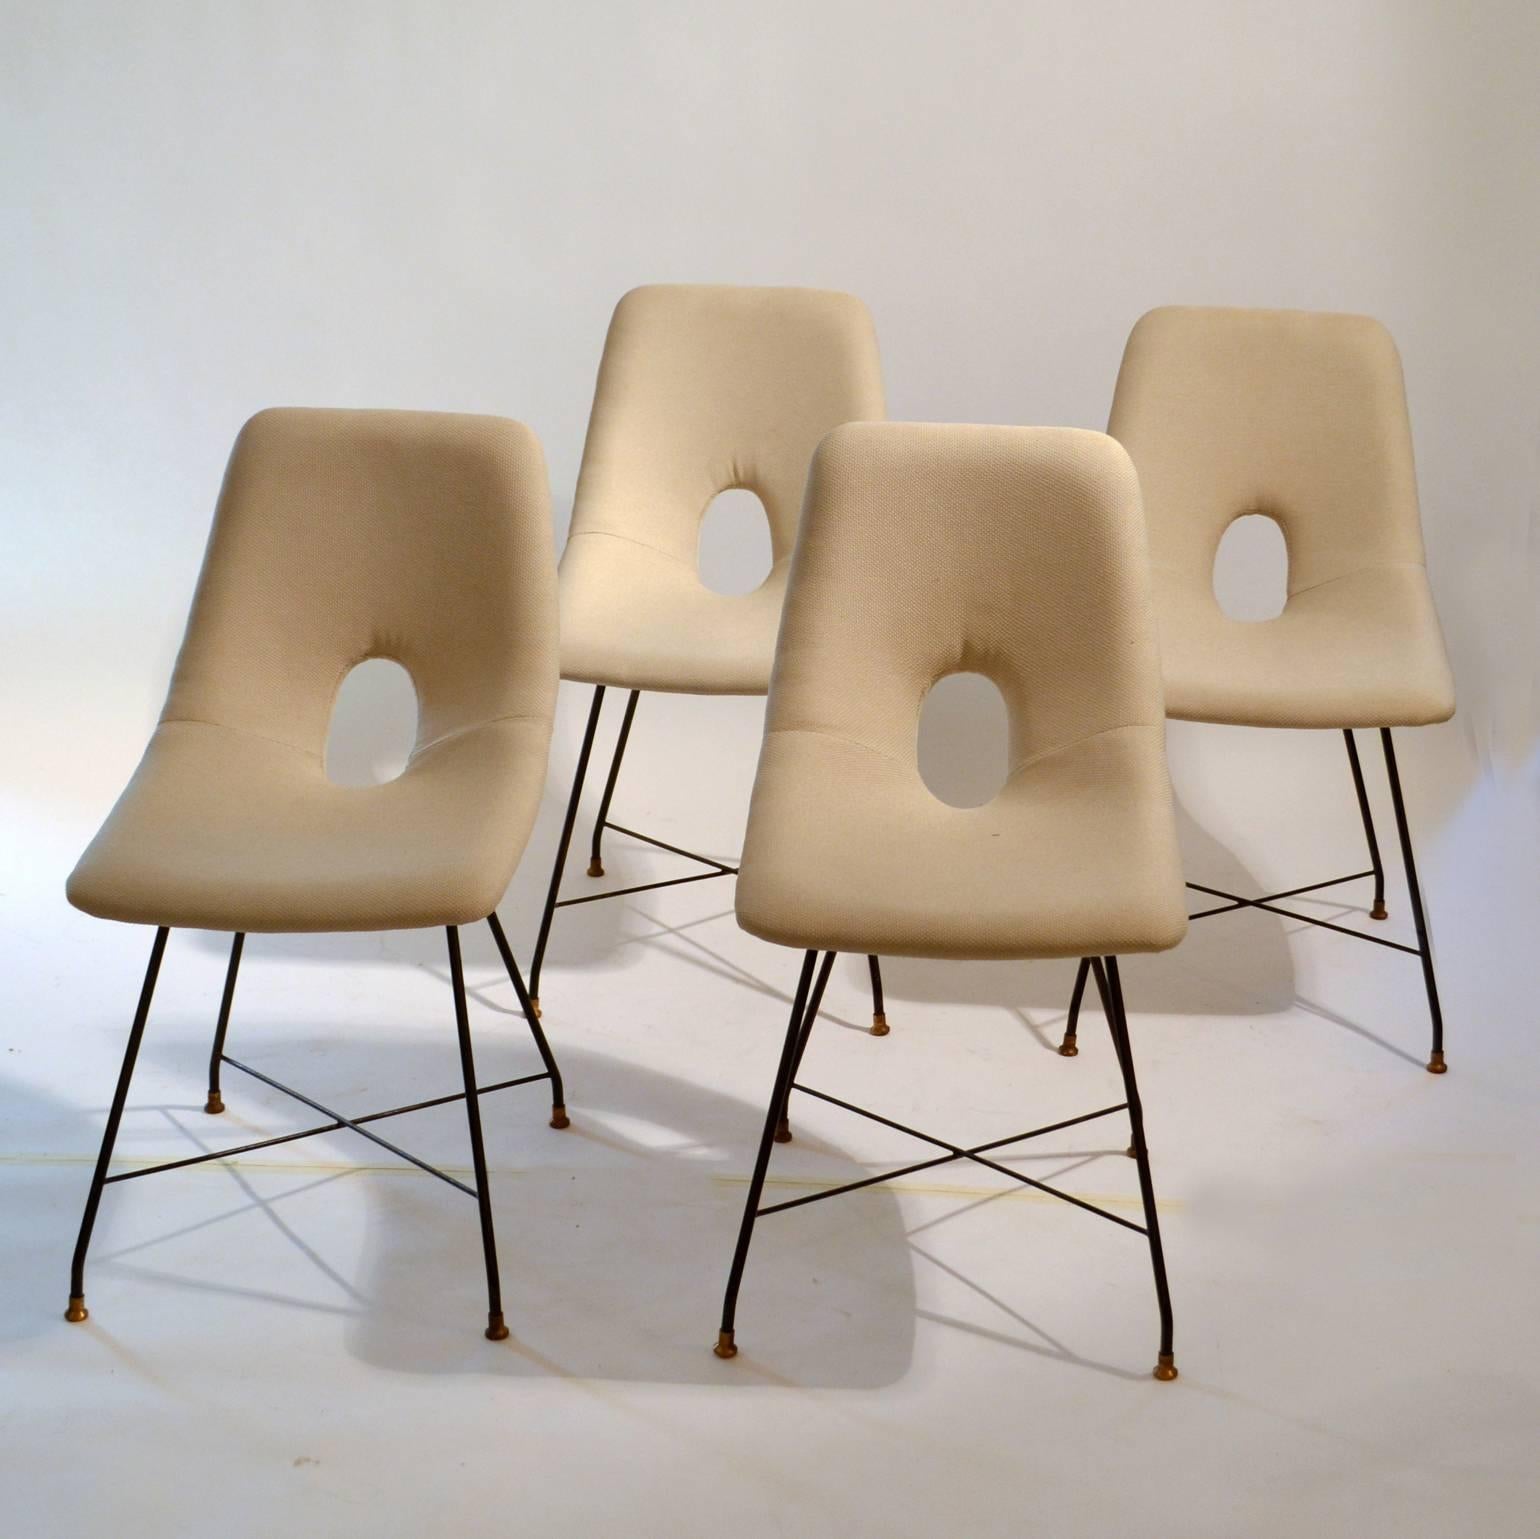 Complete set of six modernist dining chairs, model Cosmos. Italian design by Augusto Bozzi for Saporiti, Italy, 1950s contains a pair of armchairs (width 68cm) and four chairs (width 42 cm) on black steel frames with brass feet. The seats are